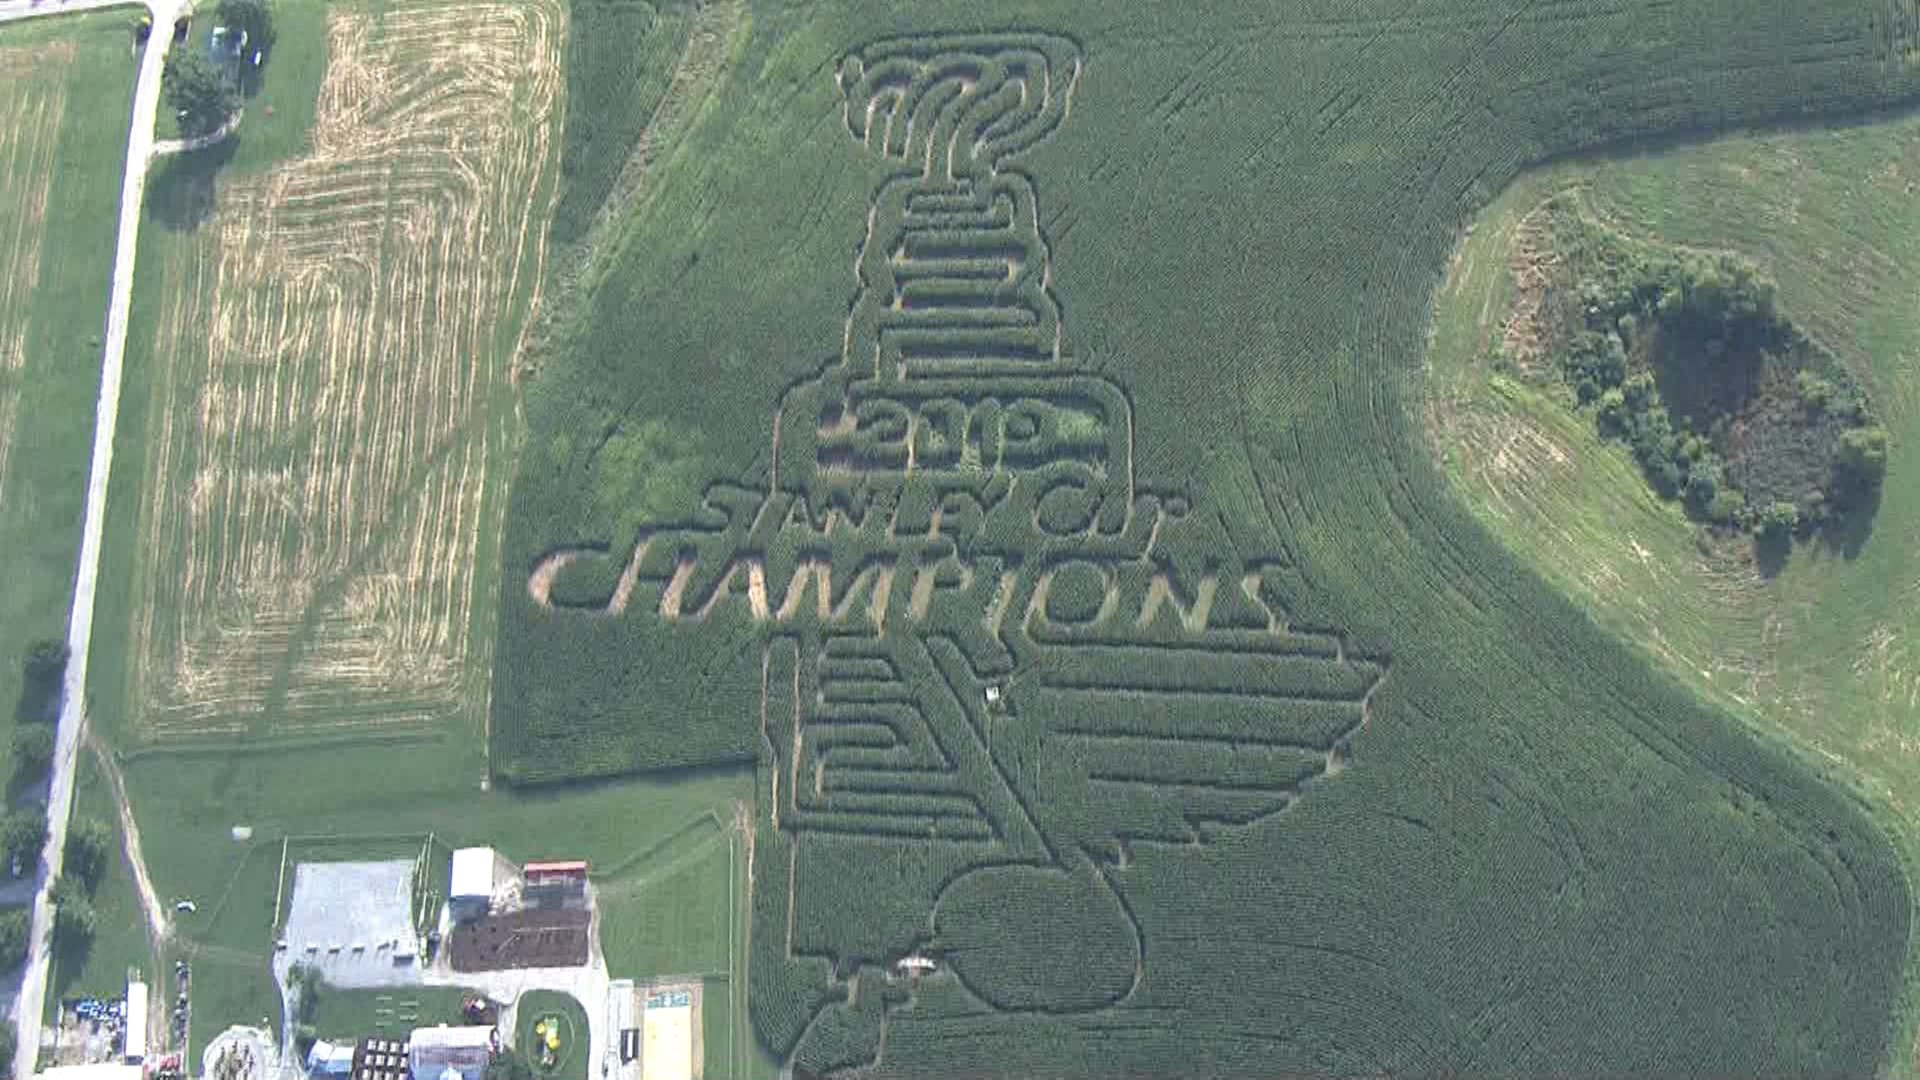 Eckert’s has a new corn maze and it honors the 2019 Stanley Cup champions! Eckert’s announced its 12-acre corn maze has been cut into the Blues and Stanley Cup logos.